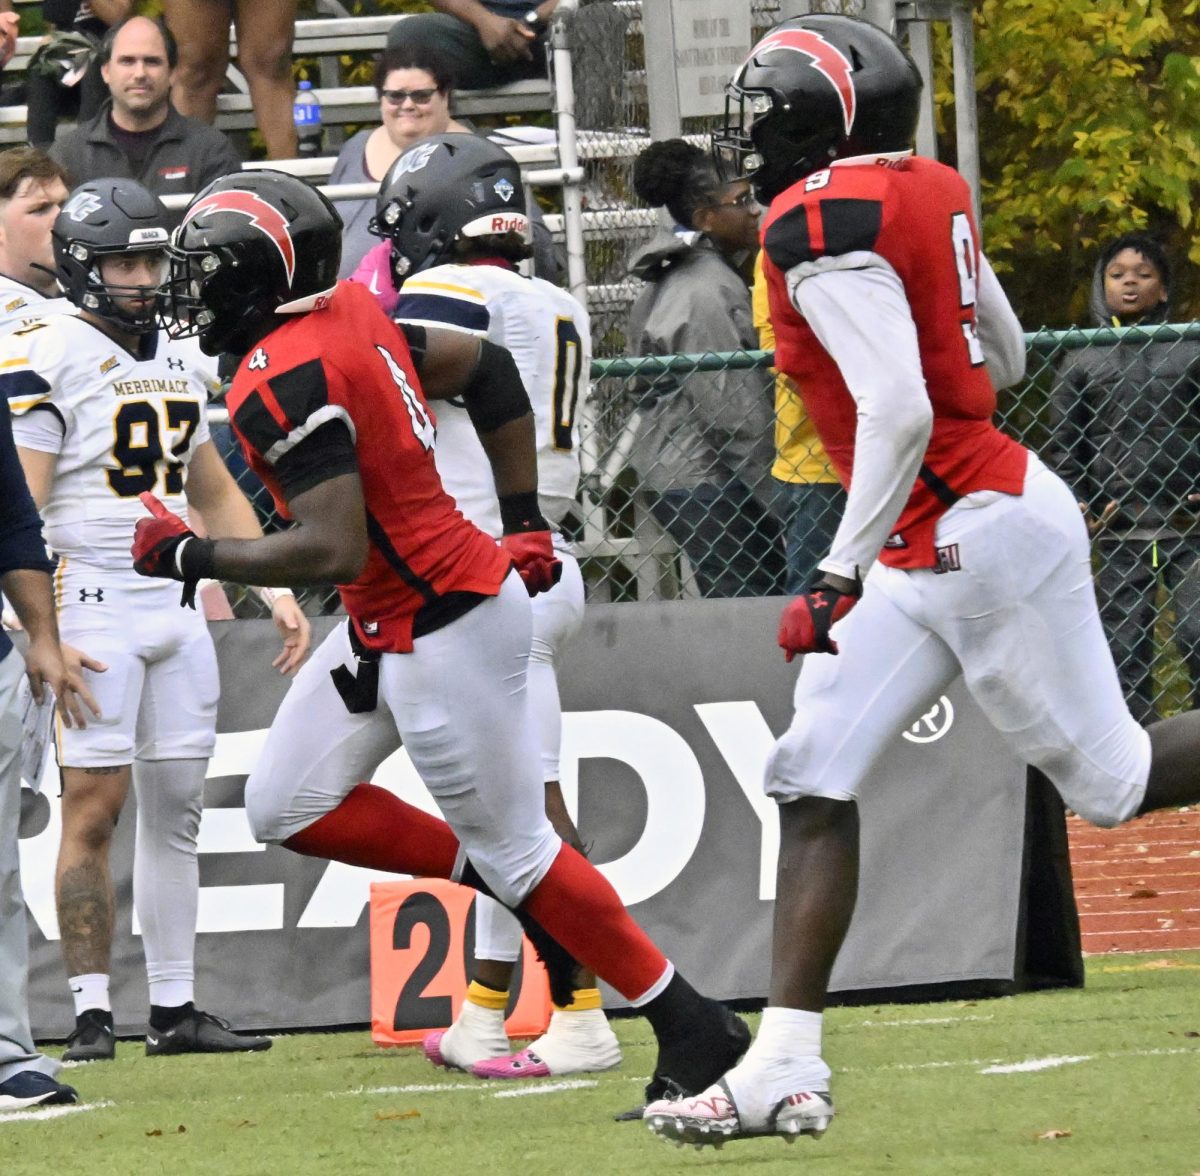 Football Rallies to Defeat Merrimack in Homecoming Game